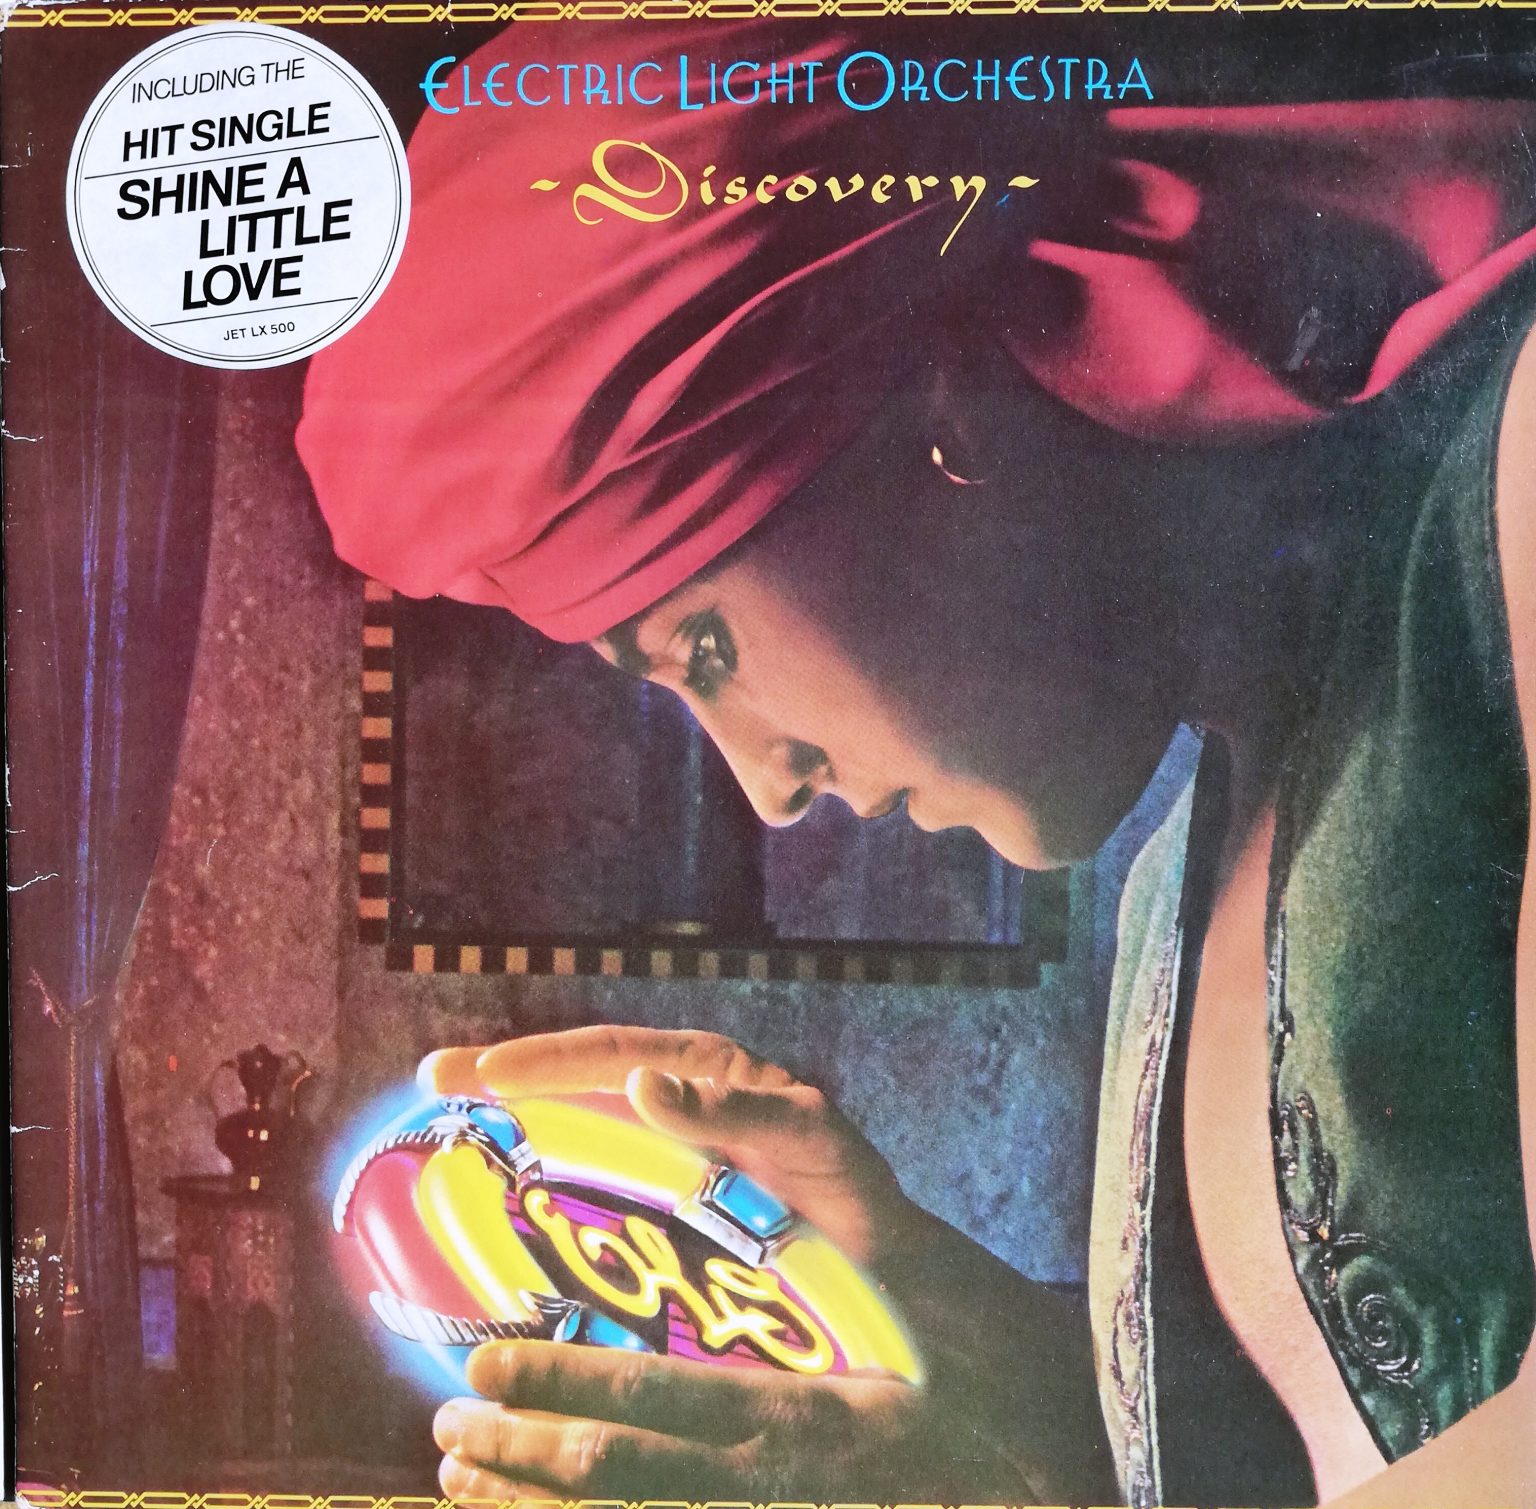 Electric Light Orchestra – Discovery LP